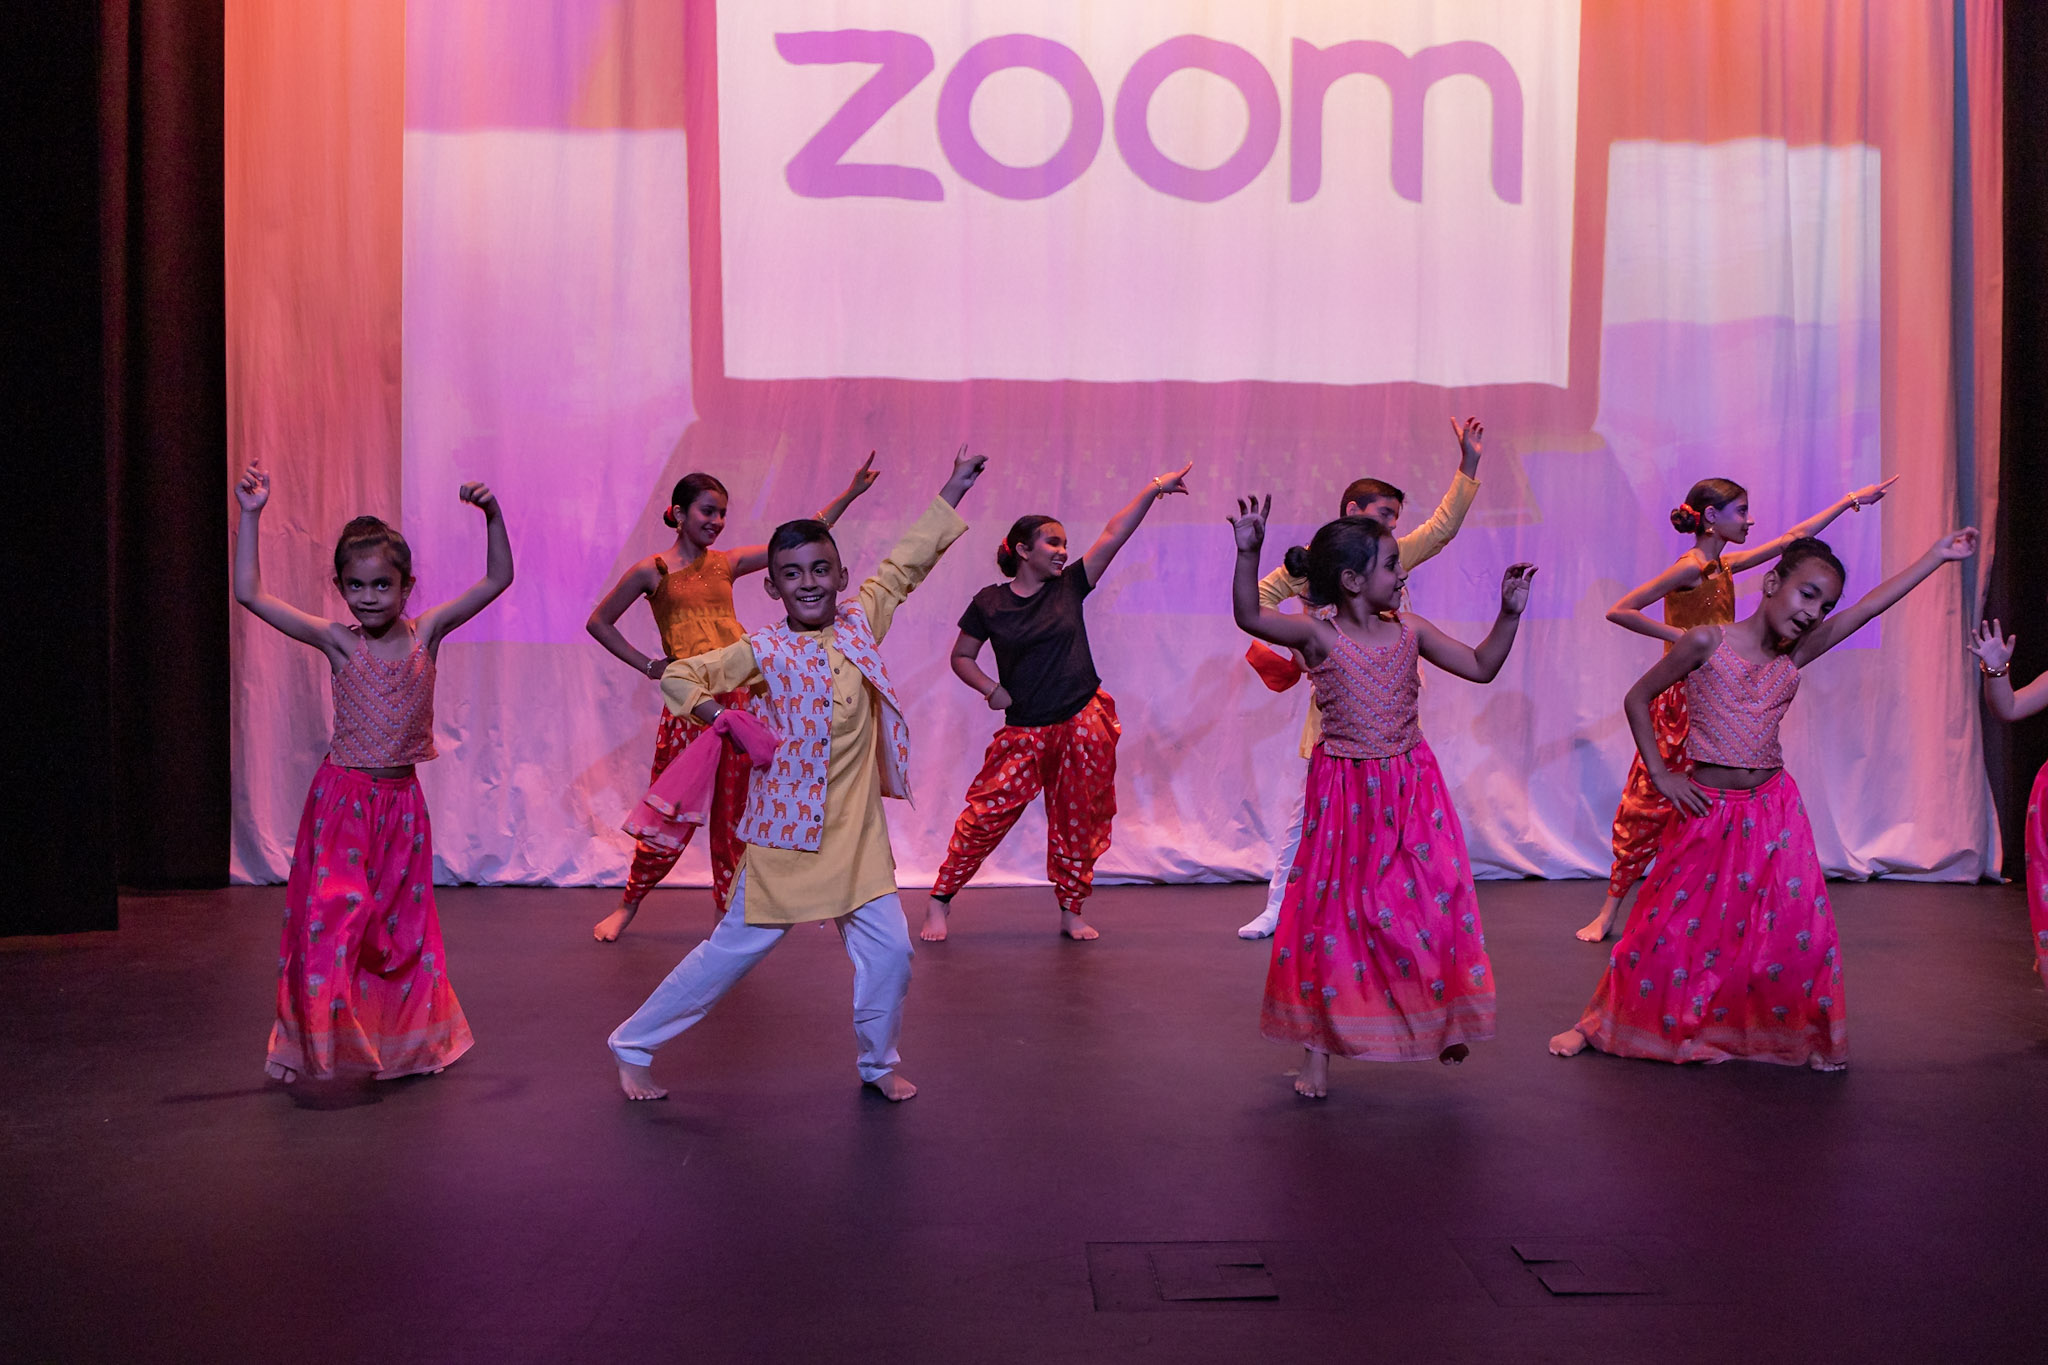 Dance Expression students perform a dynamic dance routine at the annual Dance Expression showcase in Ajax, Ontario, 2022, with a backdrop displaying the Zoom logo